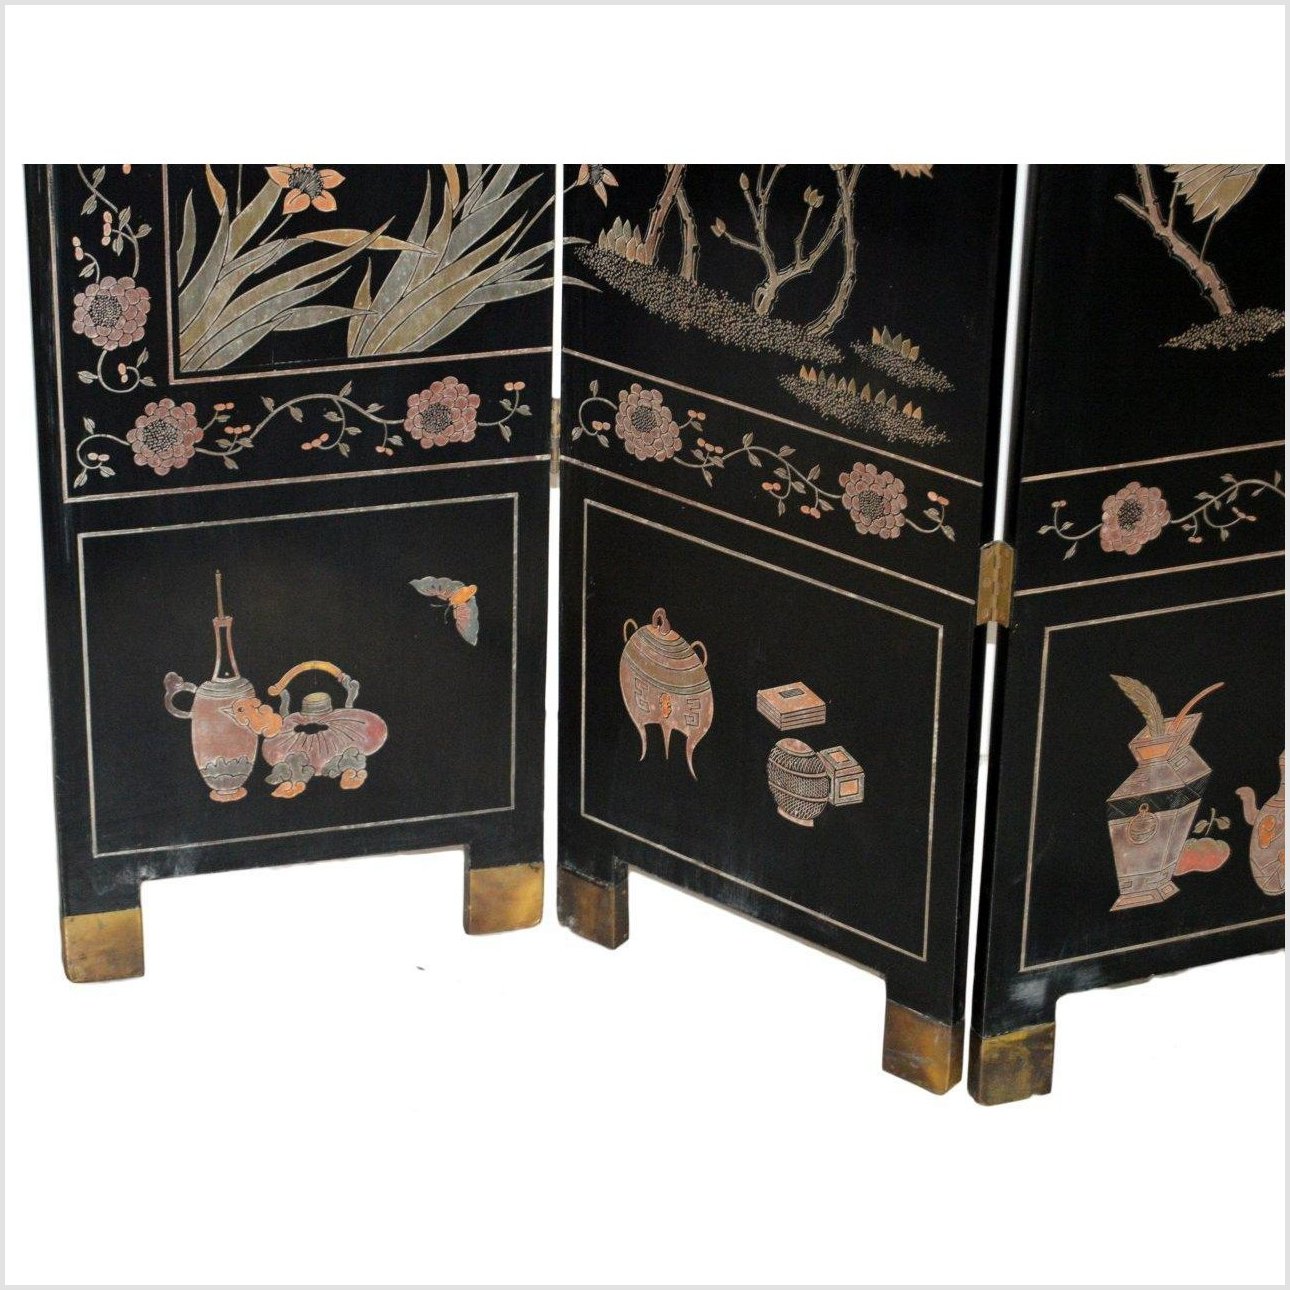 4-Panel Black Screen Designed with Trees, Birds and Flowers-YN2889-7. Asian & Chinese Furniture, Art, Antiques, Vintage Home Décor for sale at FEA Home